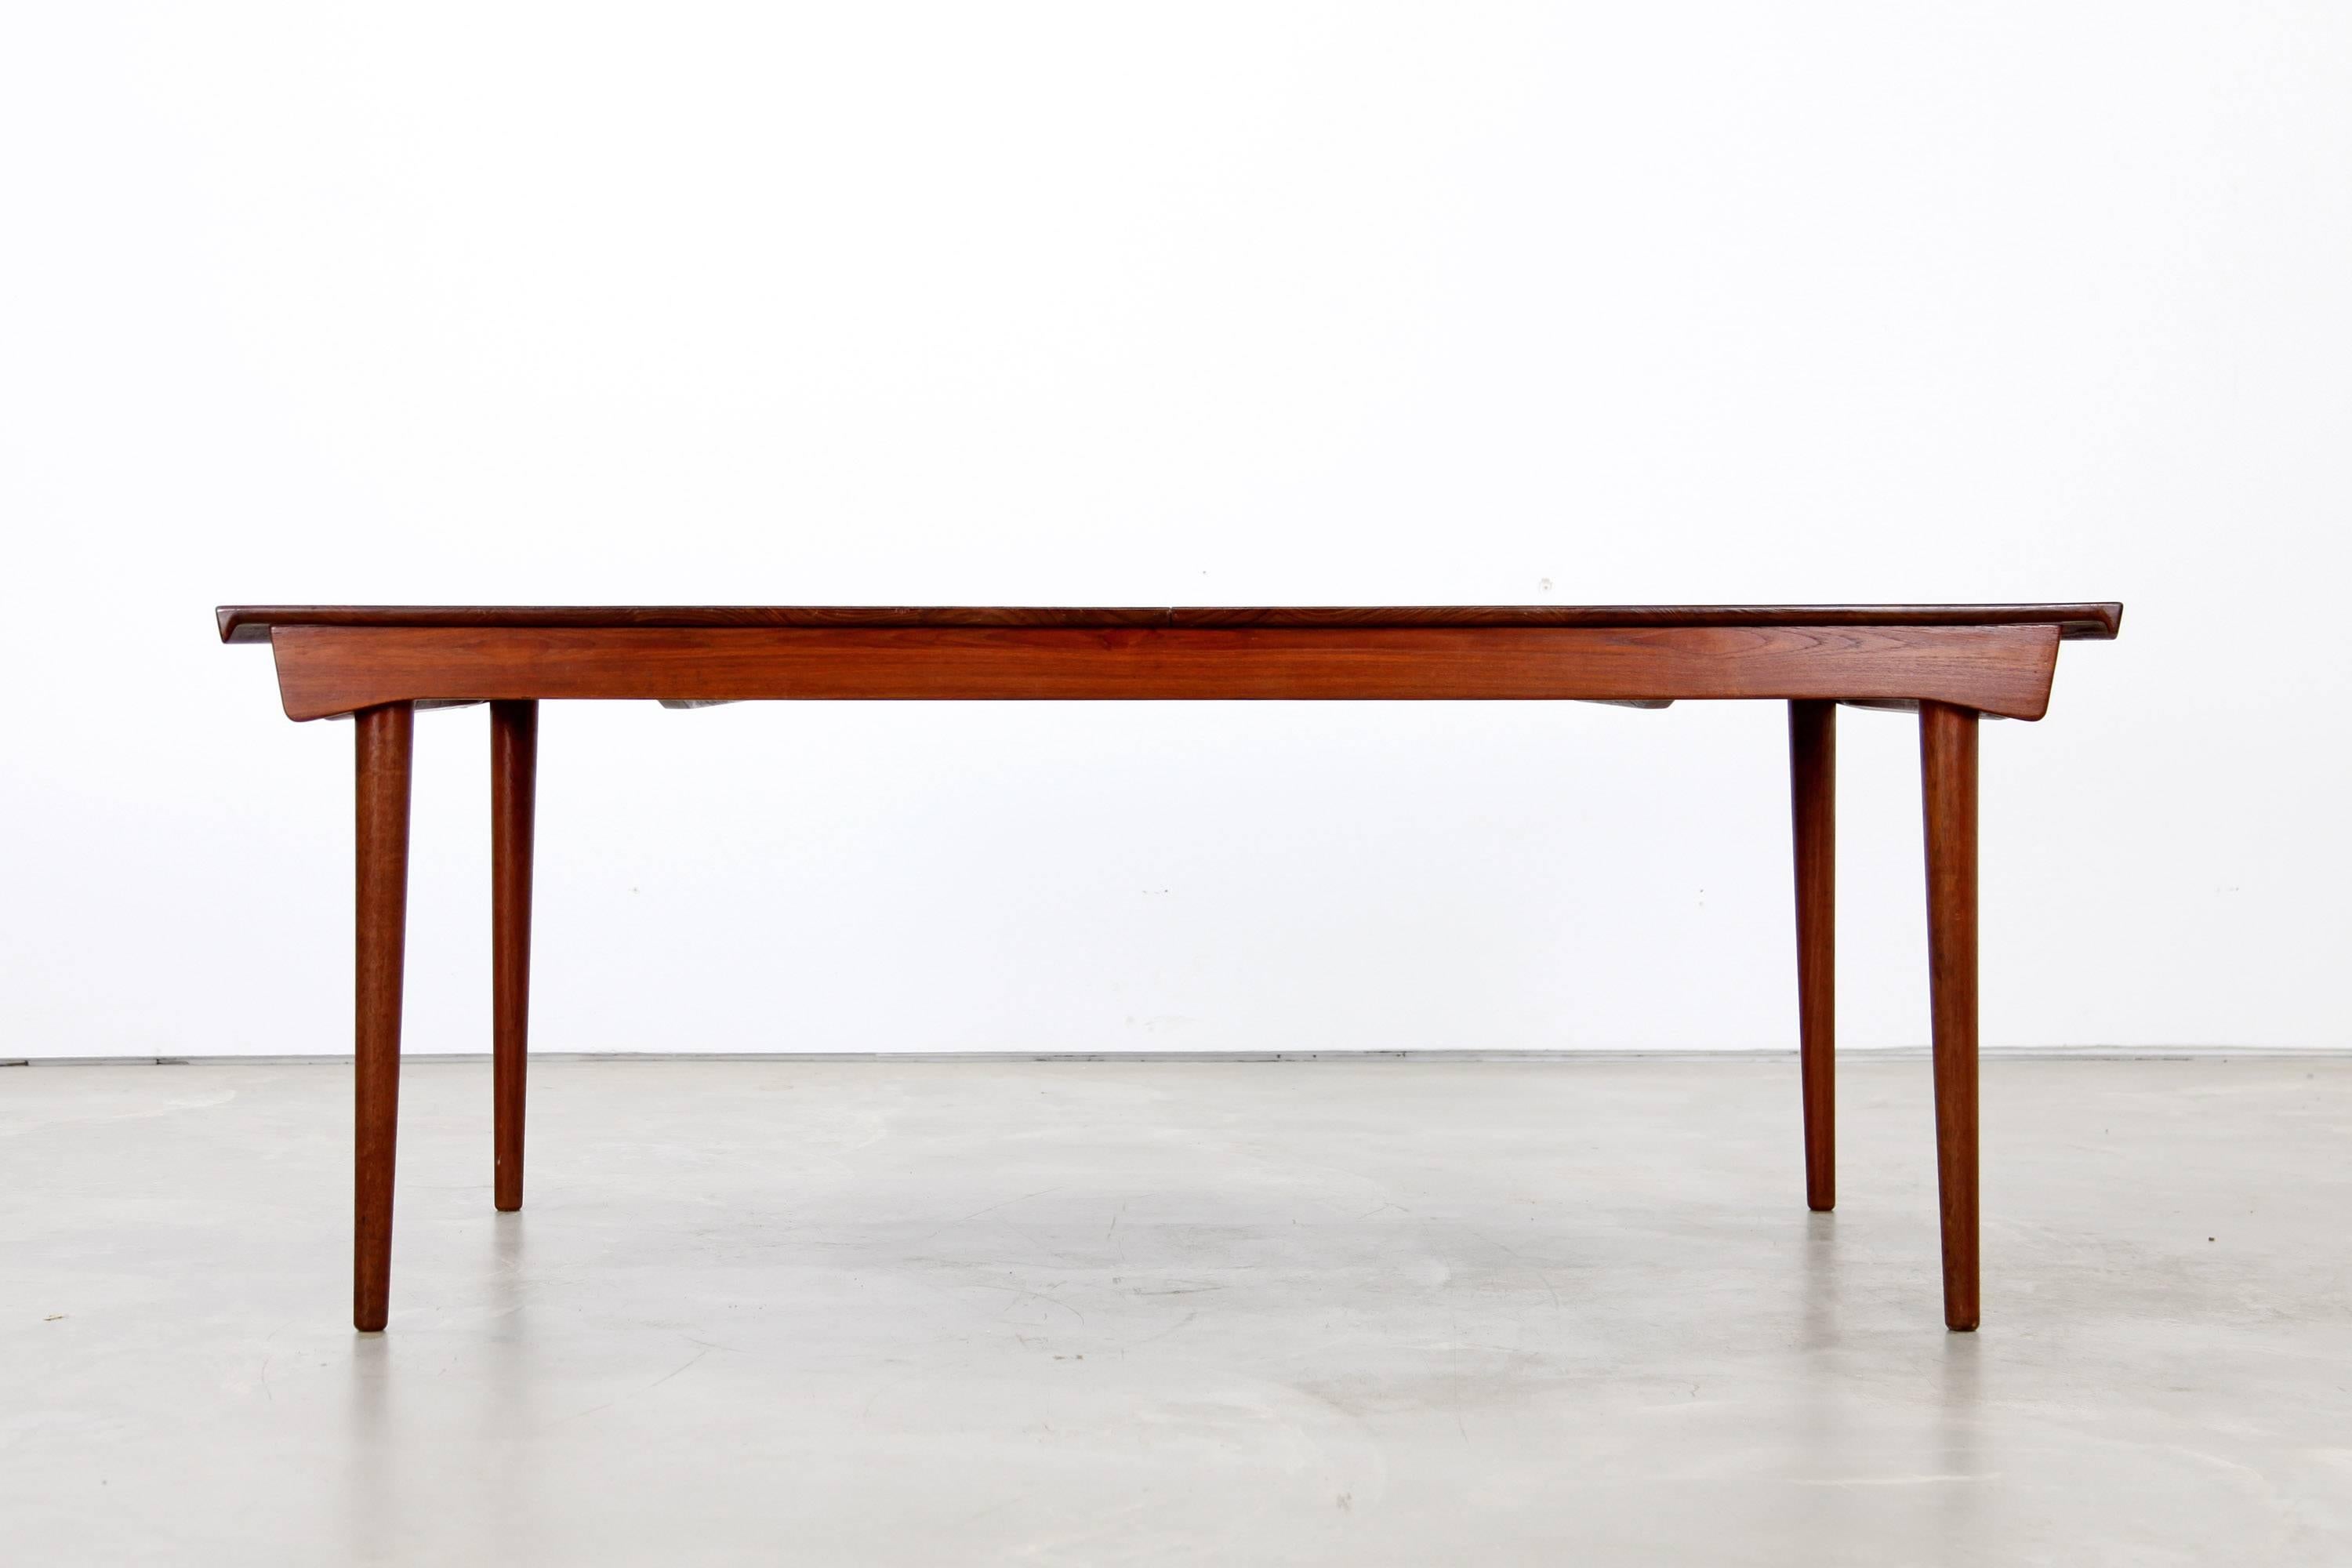 Extendable dining table, designed by Finn Juhl. This piece is made from solid wood. It is in beautiful restored condition. The table can be extended with two leaves, that are stored within the table. It can be extended in two steps from184 cm to 270